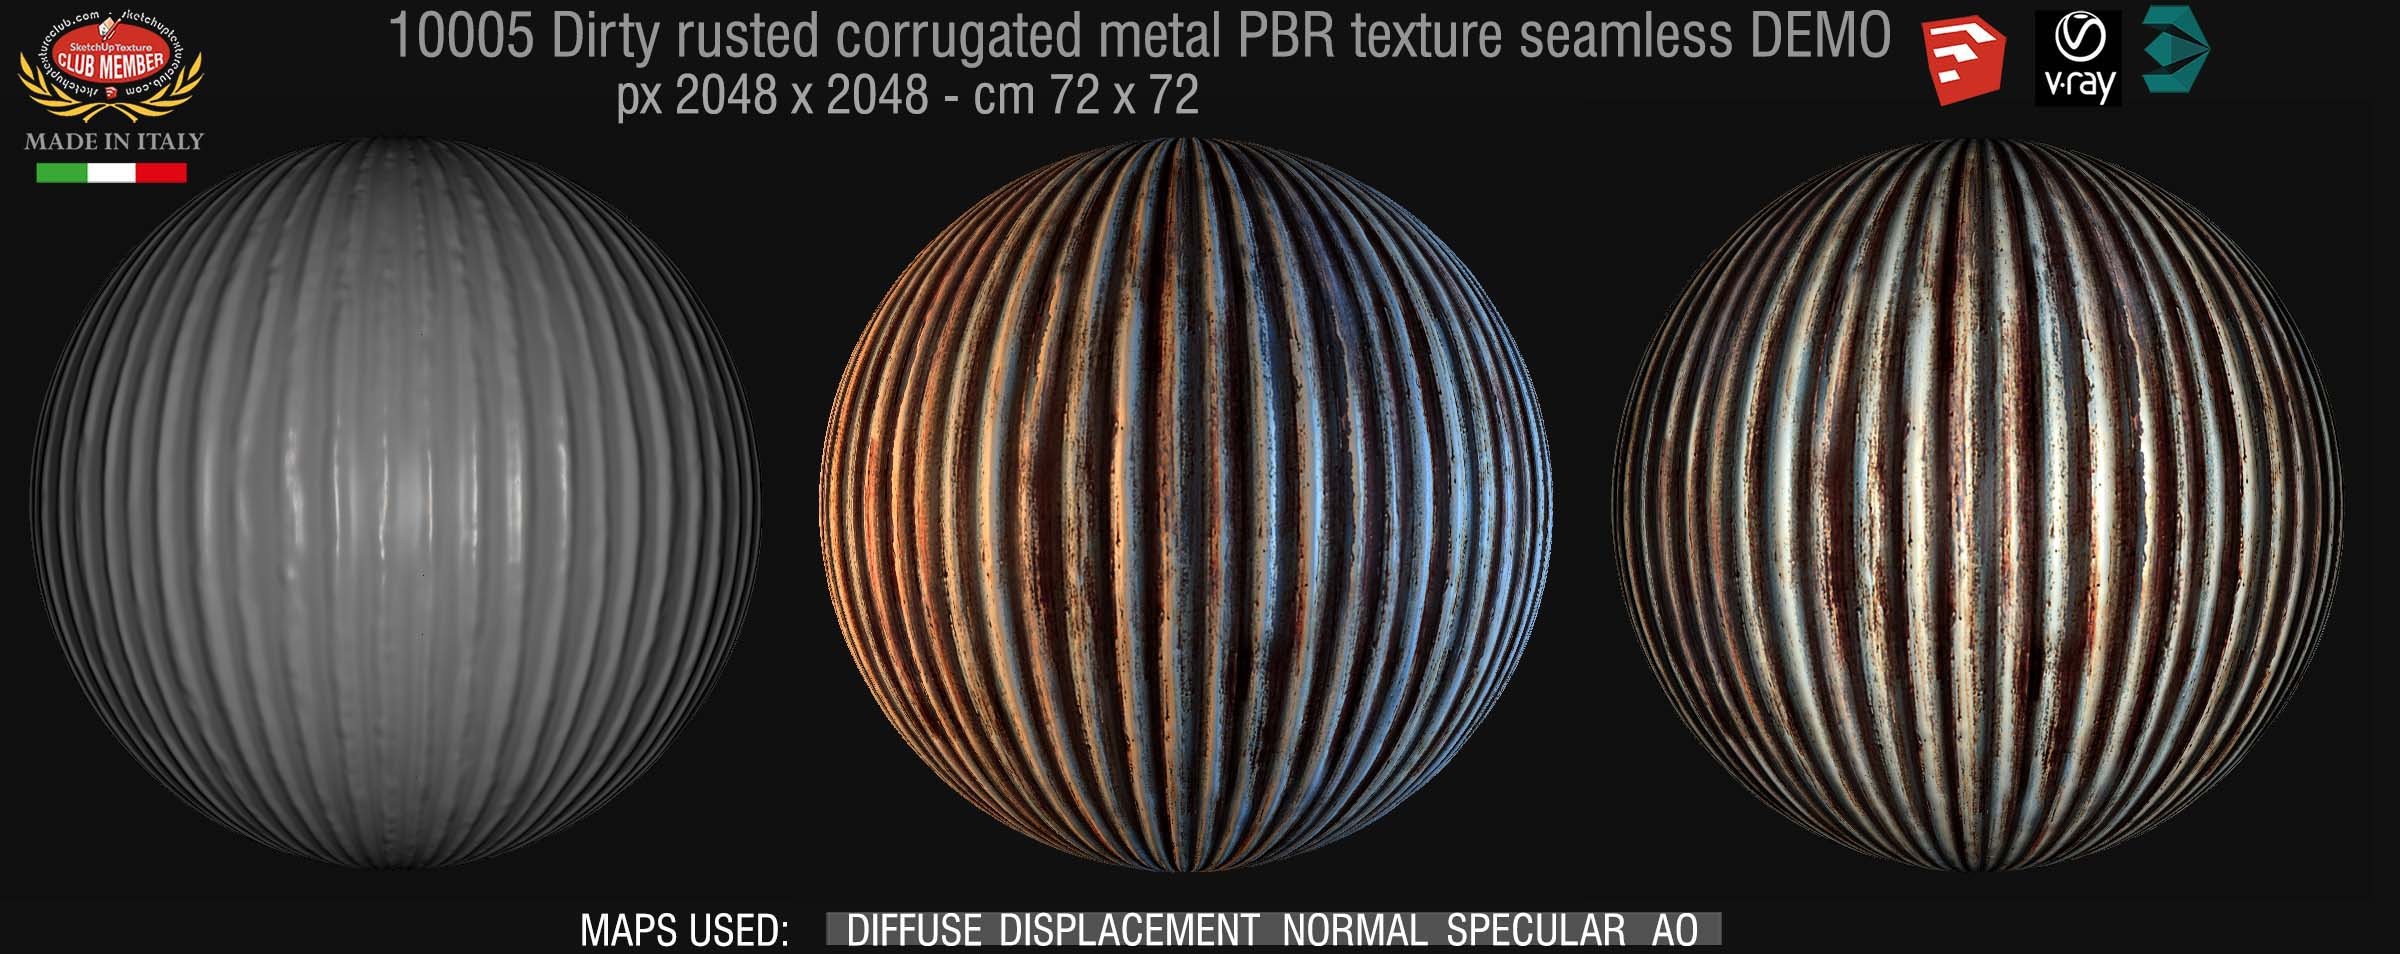 10005 Dirty rusted corrugated metal PBR texture seamless DEMO